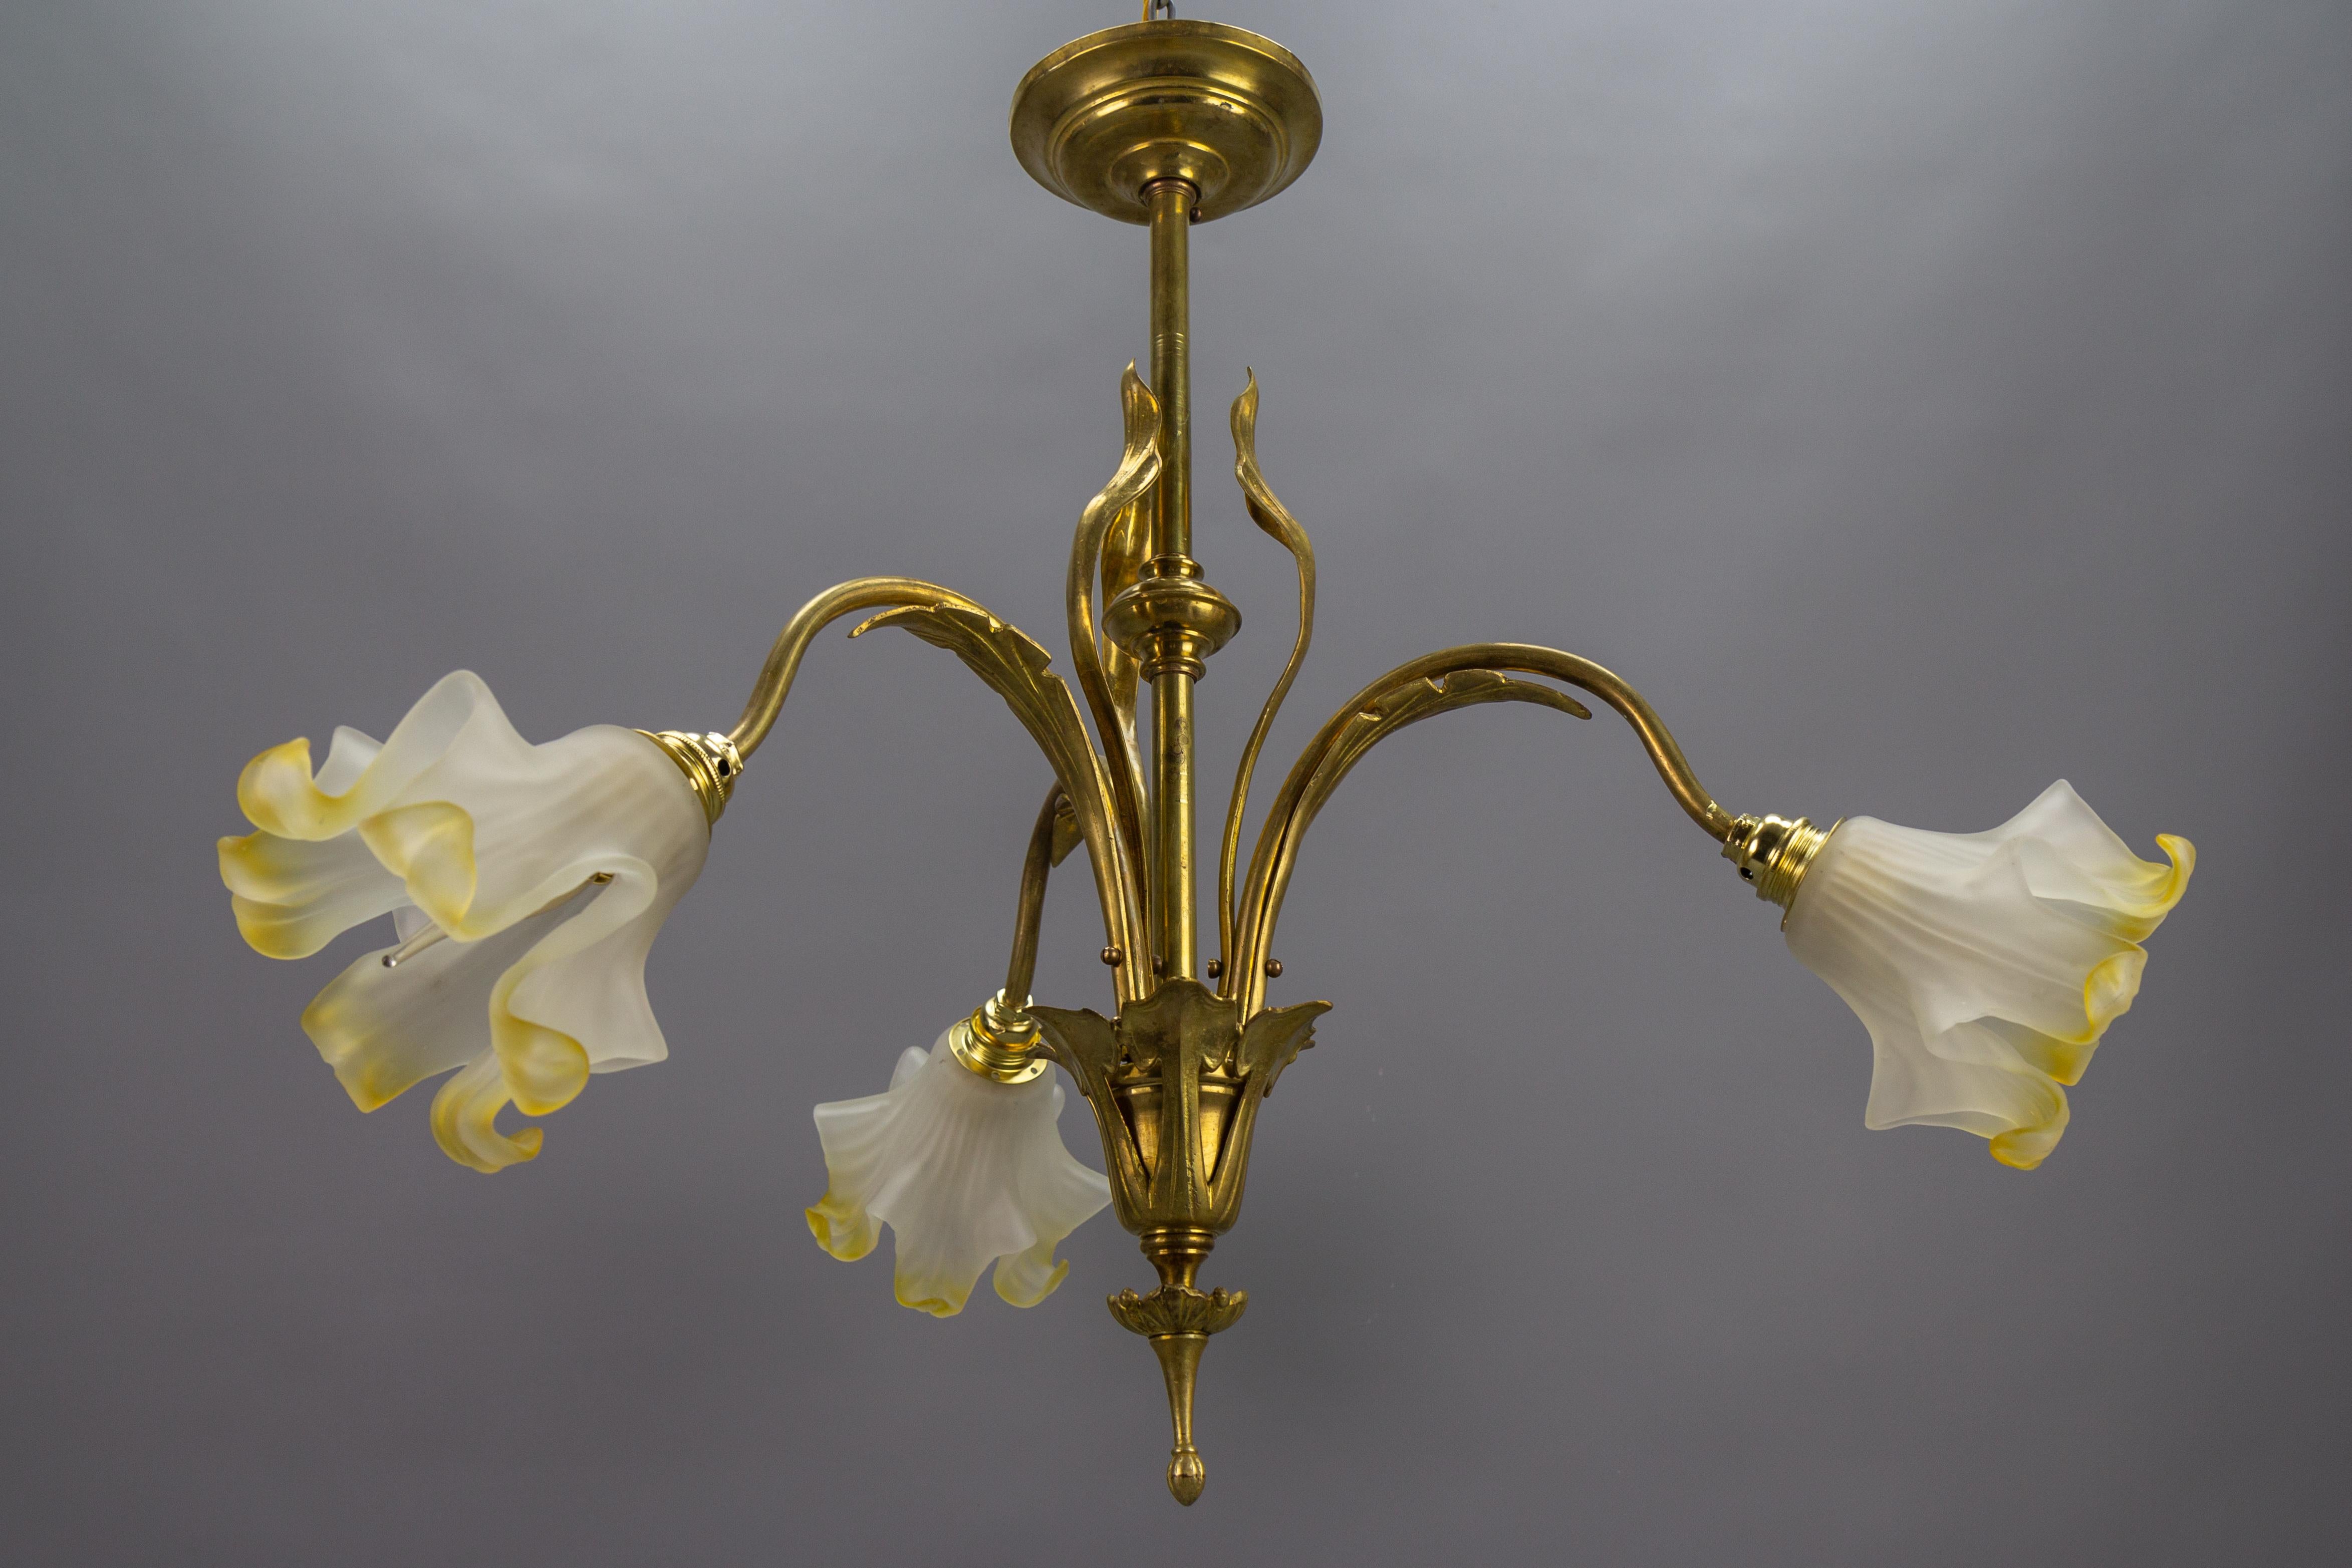 French Art Nouveau Brass and Glass Three-Light Iris-Shaped Chandelier, ca. 1910 For Sale 8